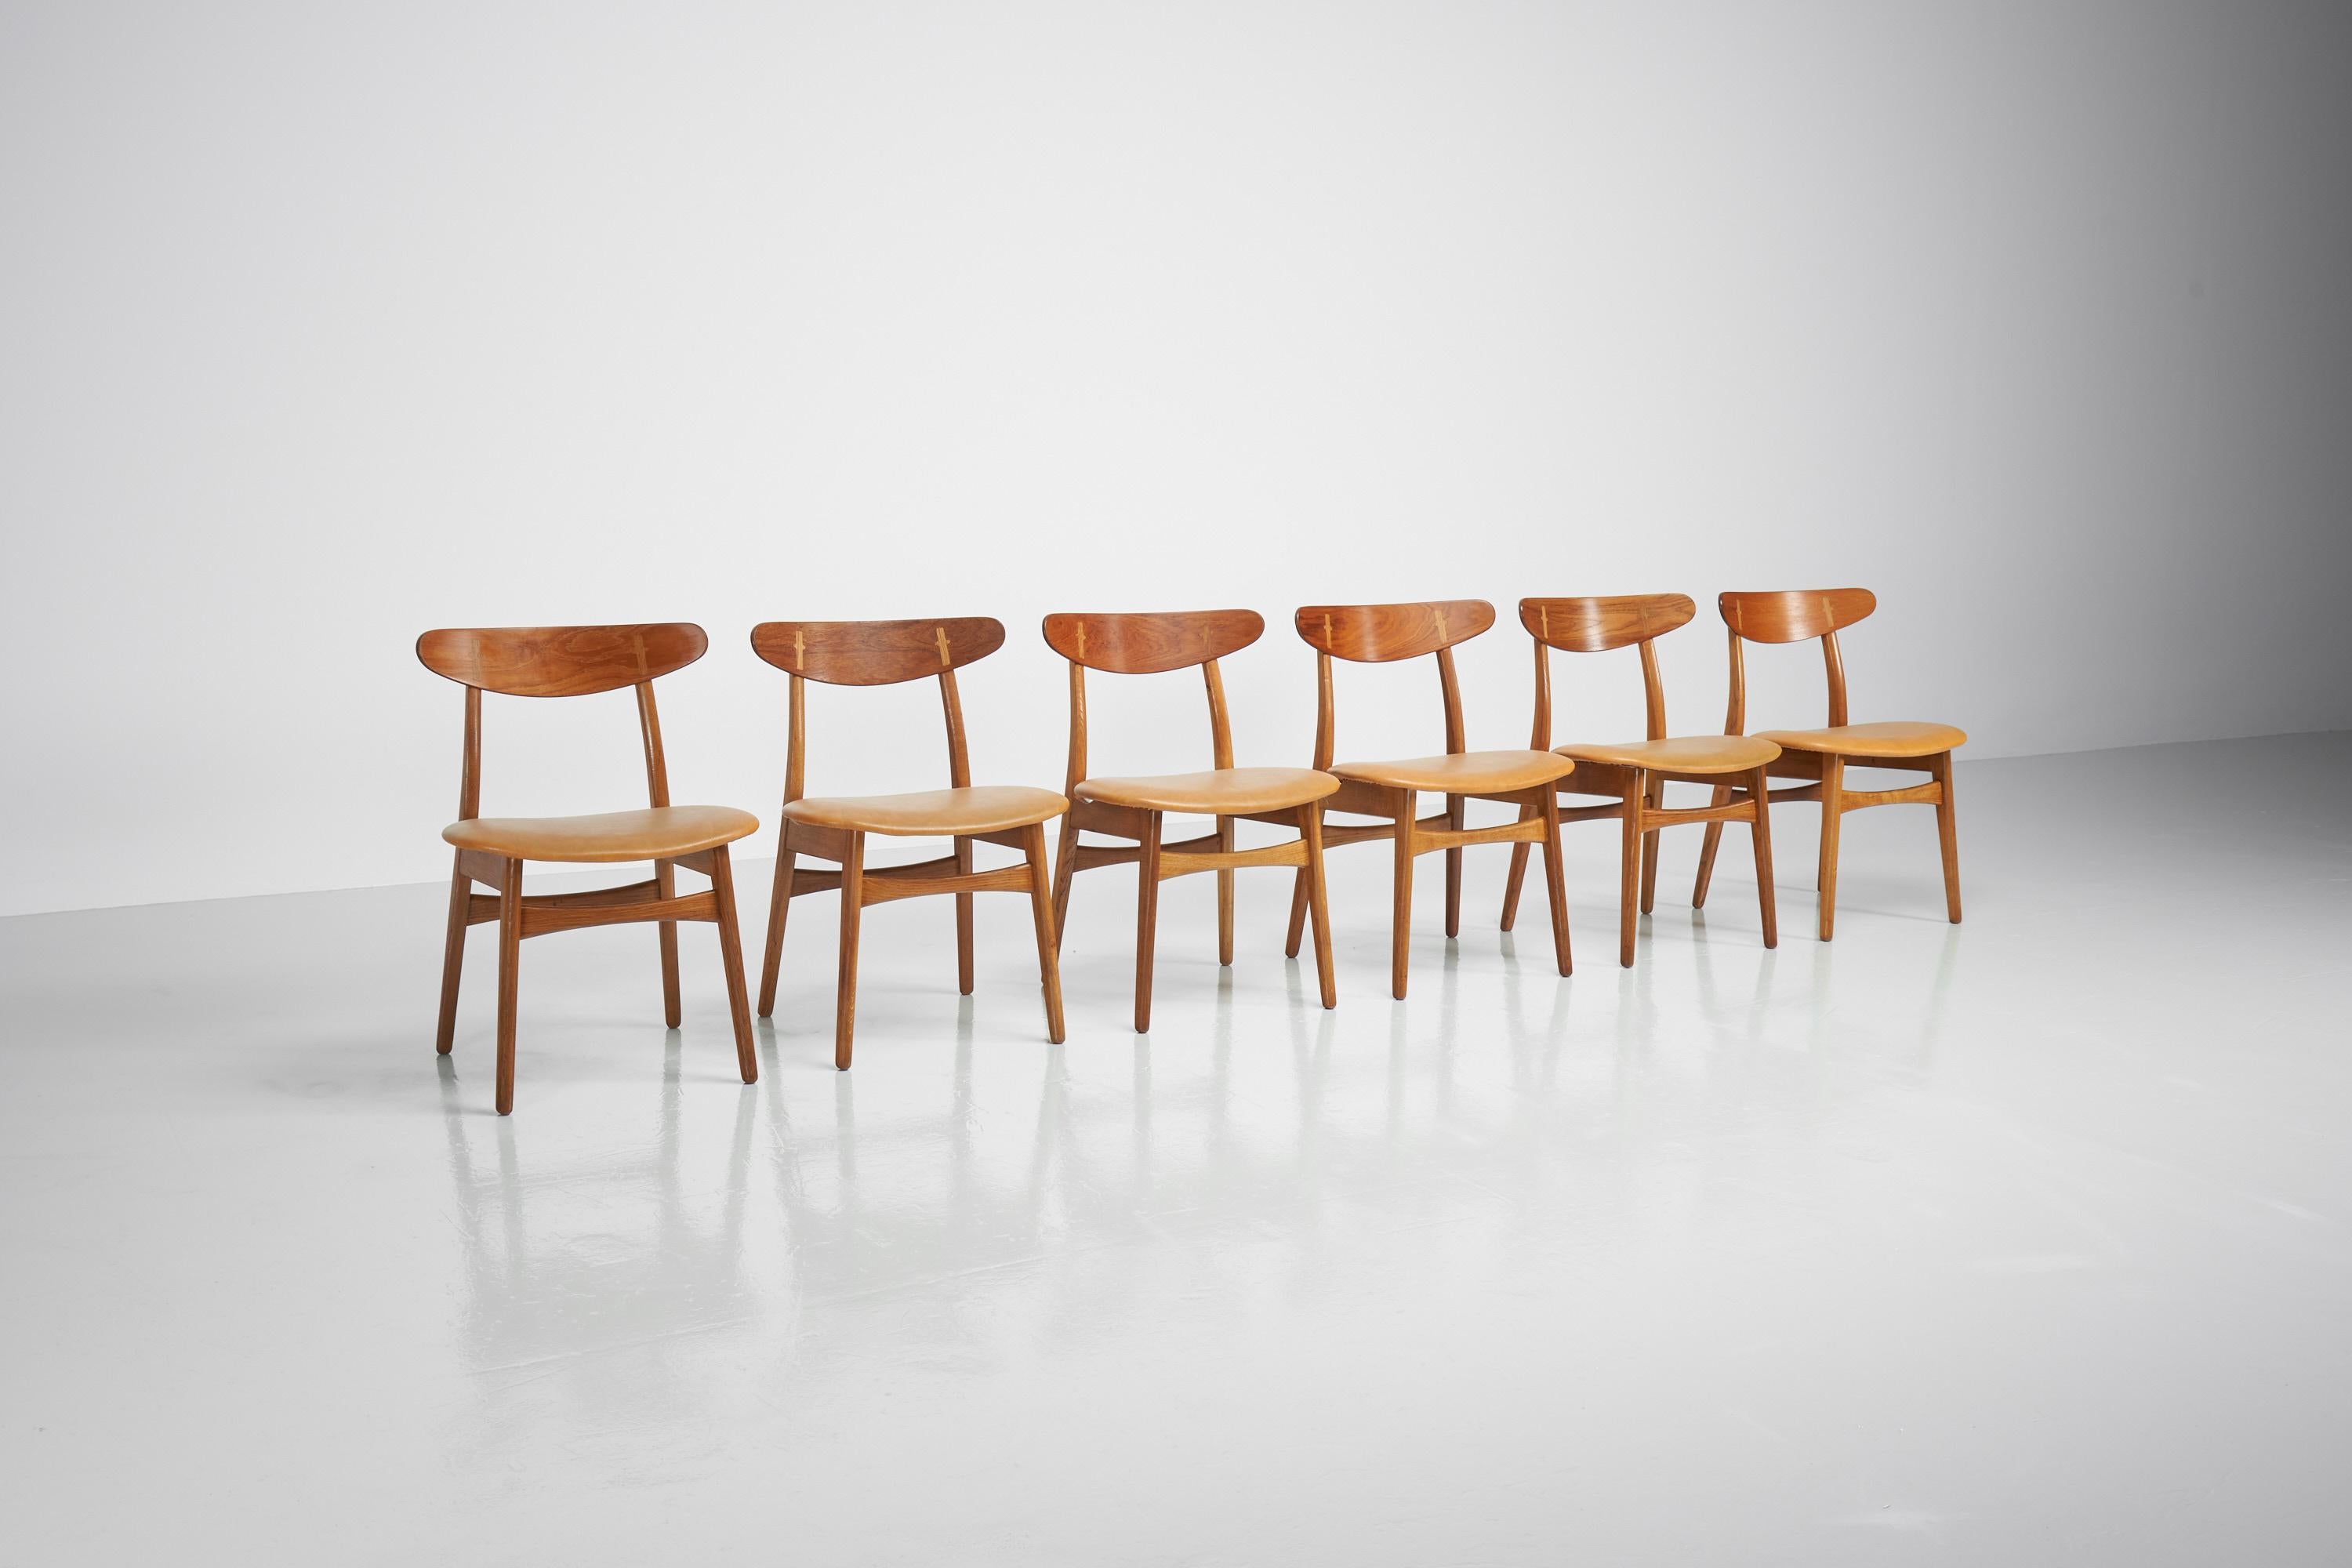 Stunning set of 6 dining chairs model CH30 designed by Hans J. Wegner and manufactured by Carl Hansen & Son, Odense Denmark 1950. These chairs are an early design by Wegner as they were first introduced already in 1950. The chair features organic